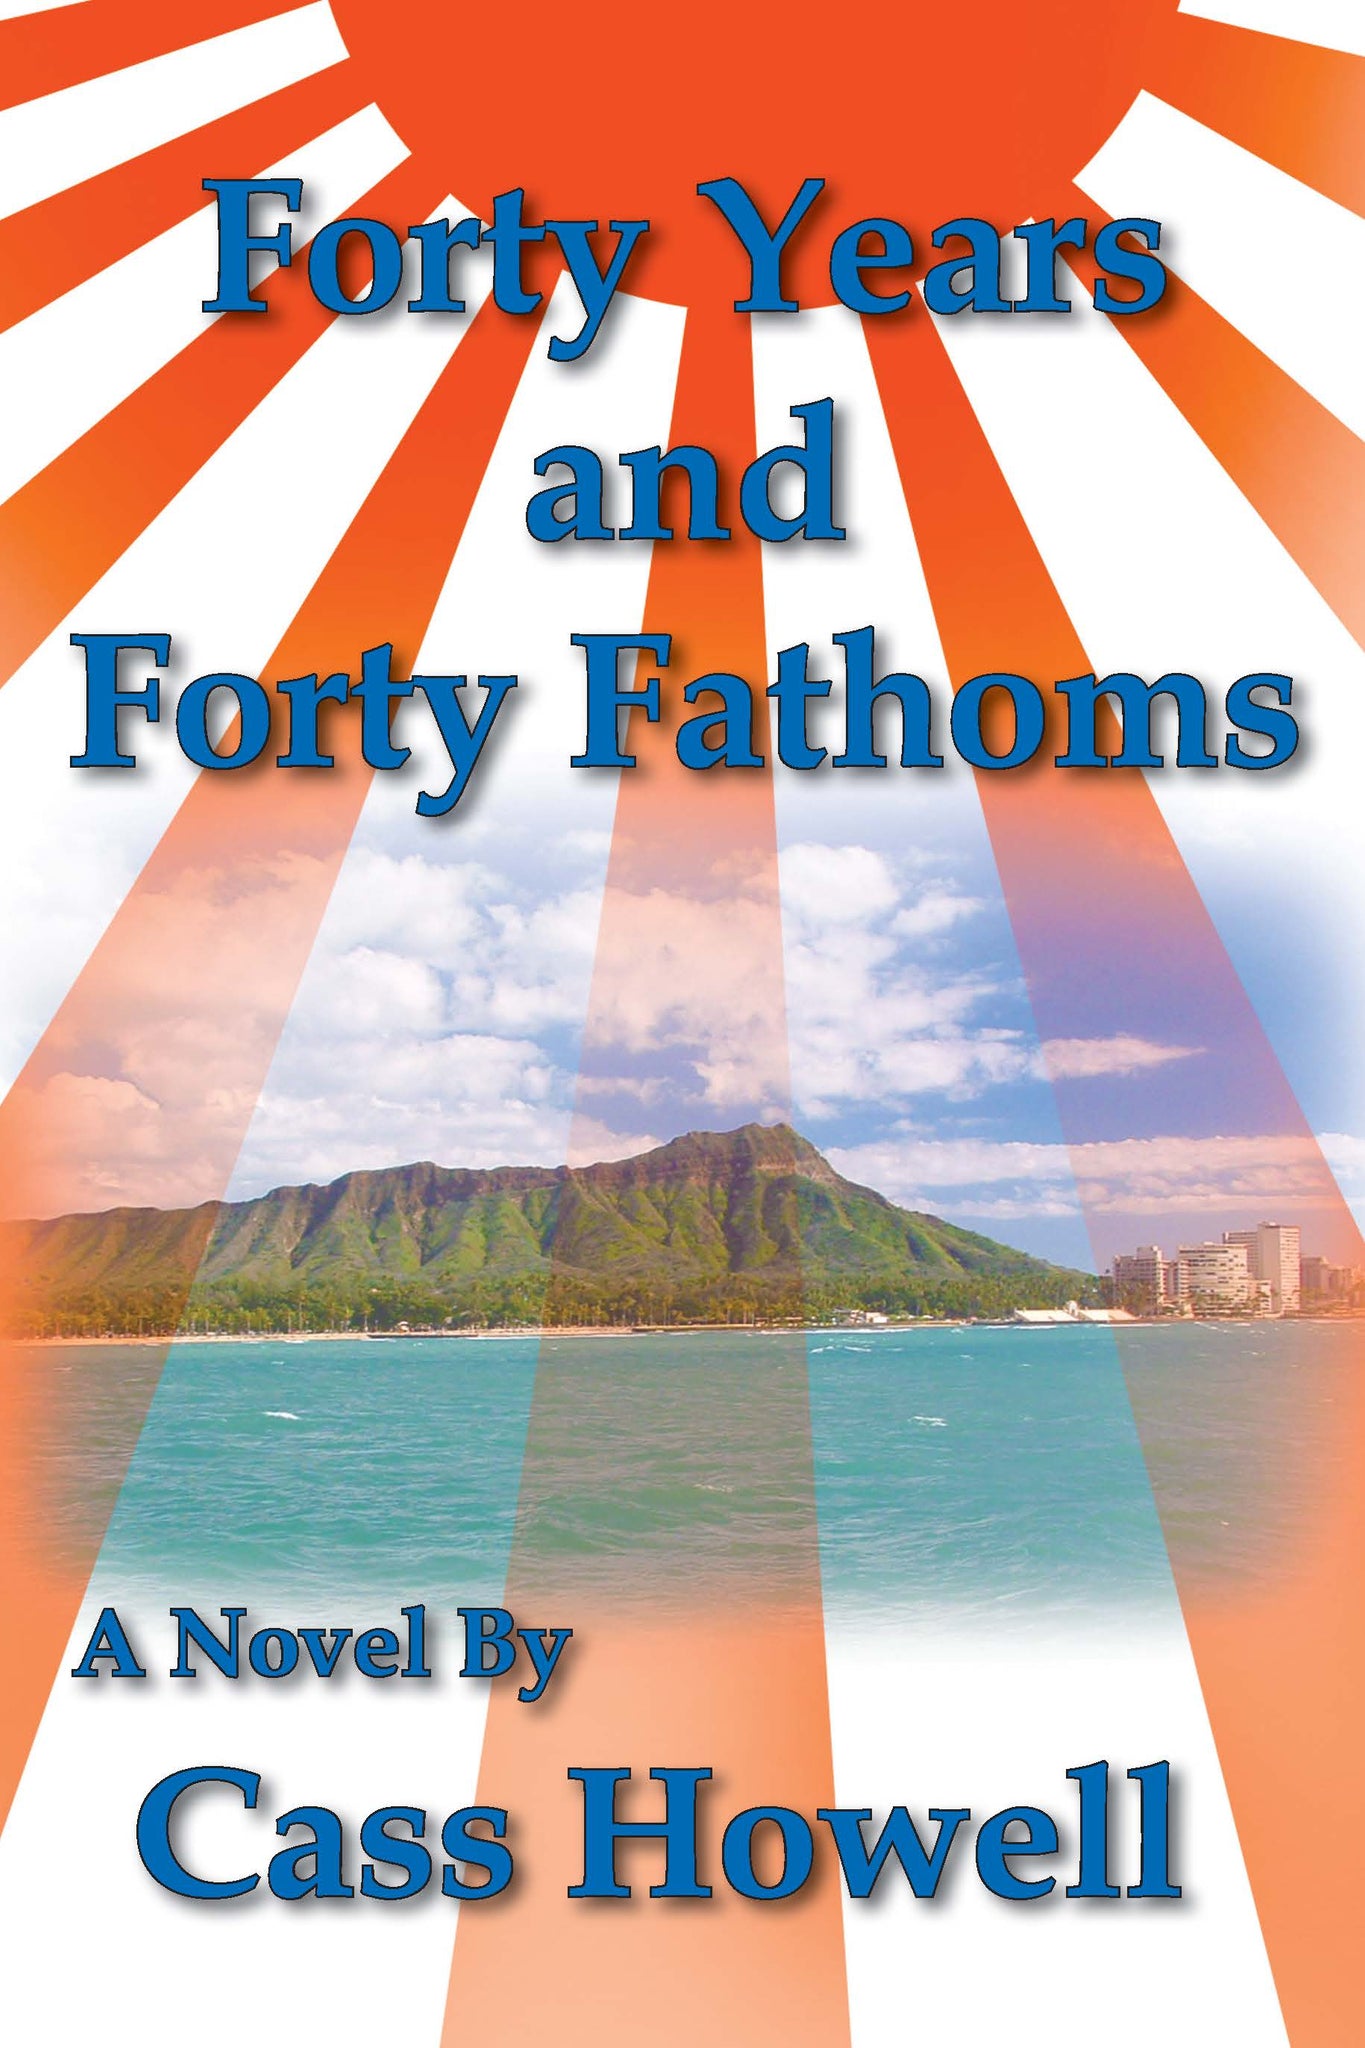 Forty Years and Forty Fathoms by Cass Howell